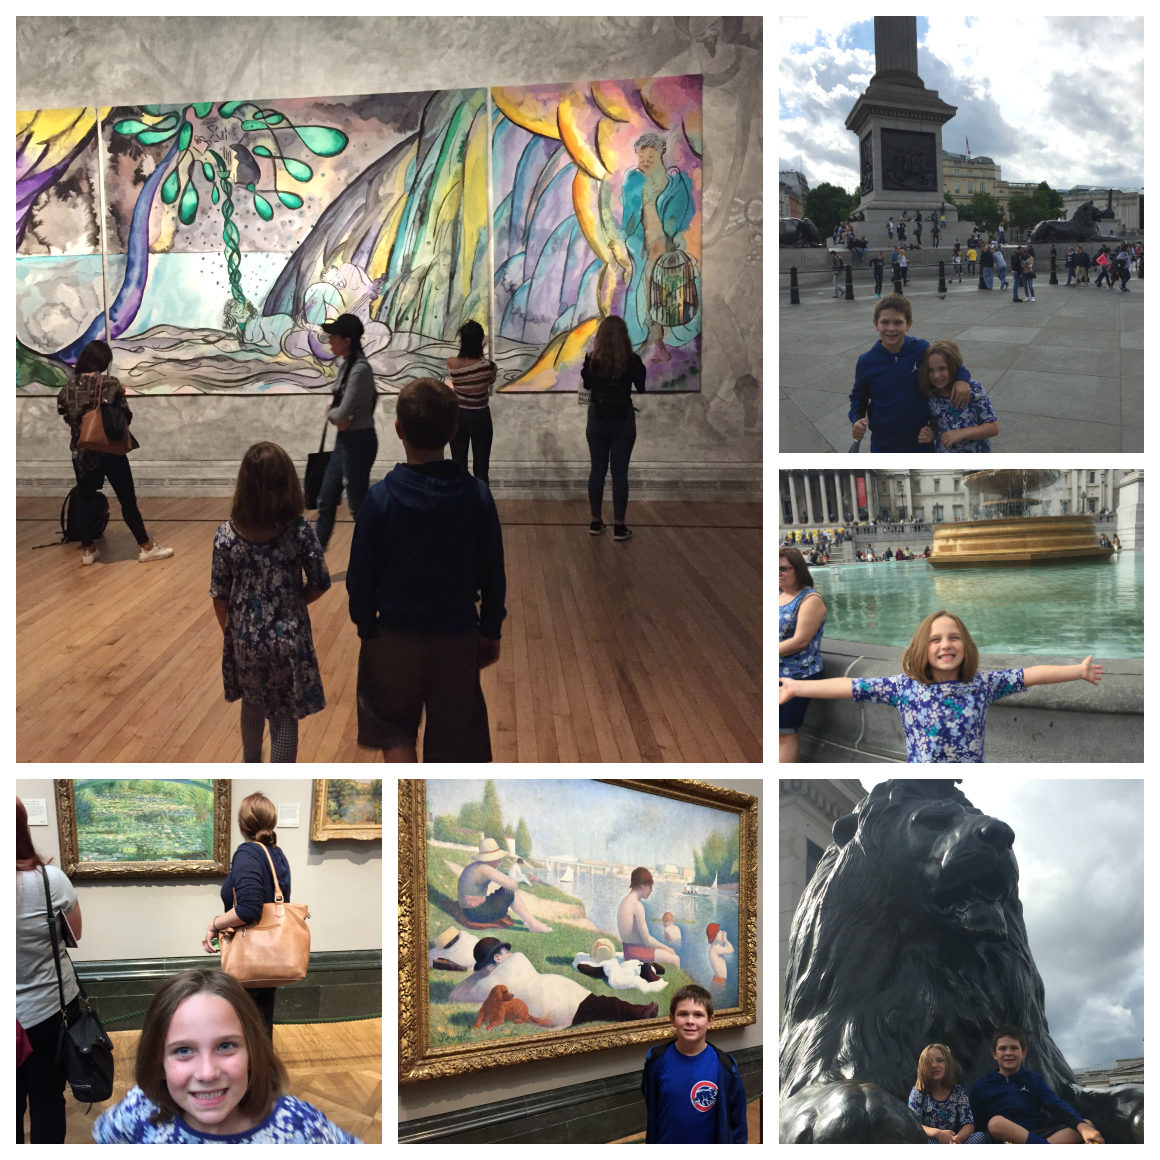 3 fun days in London with kids - an itinerary for exploring London with Kids ******* London with kids, stuff to do in London, London England, Best of London, Family trip to London, London Vacation, London with Kids, Fun vacation in London